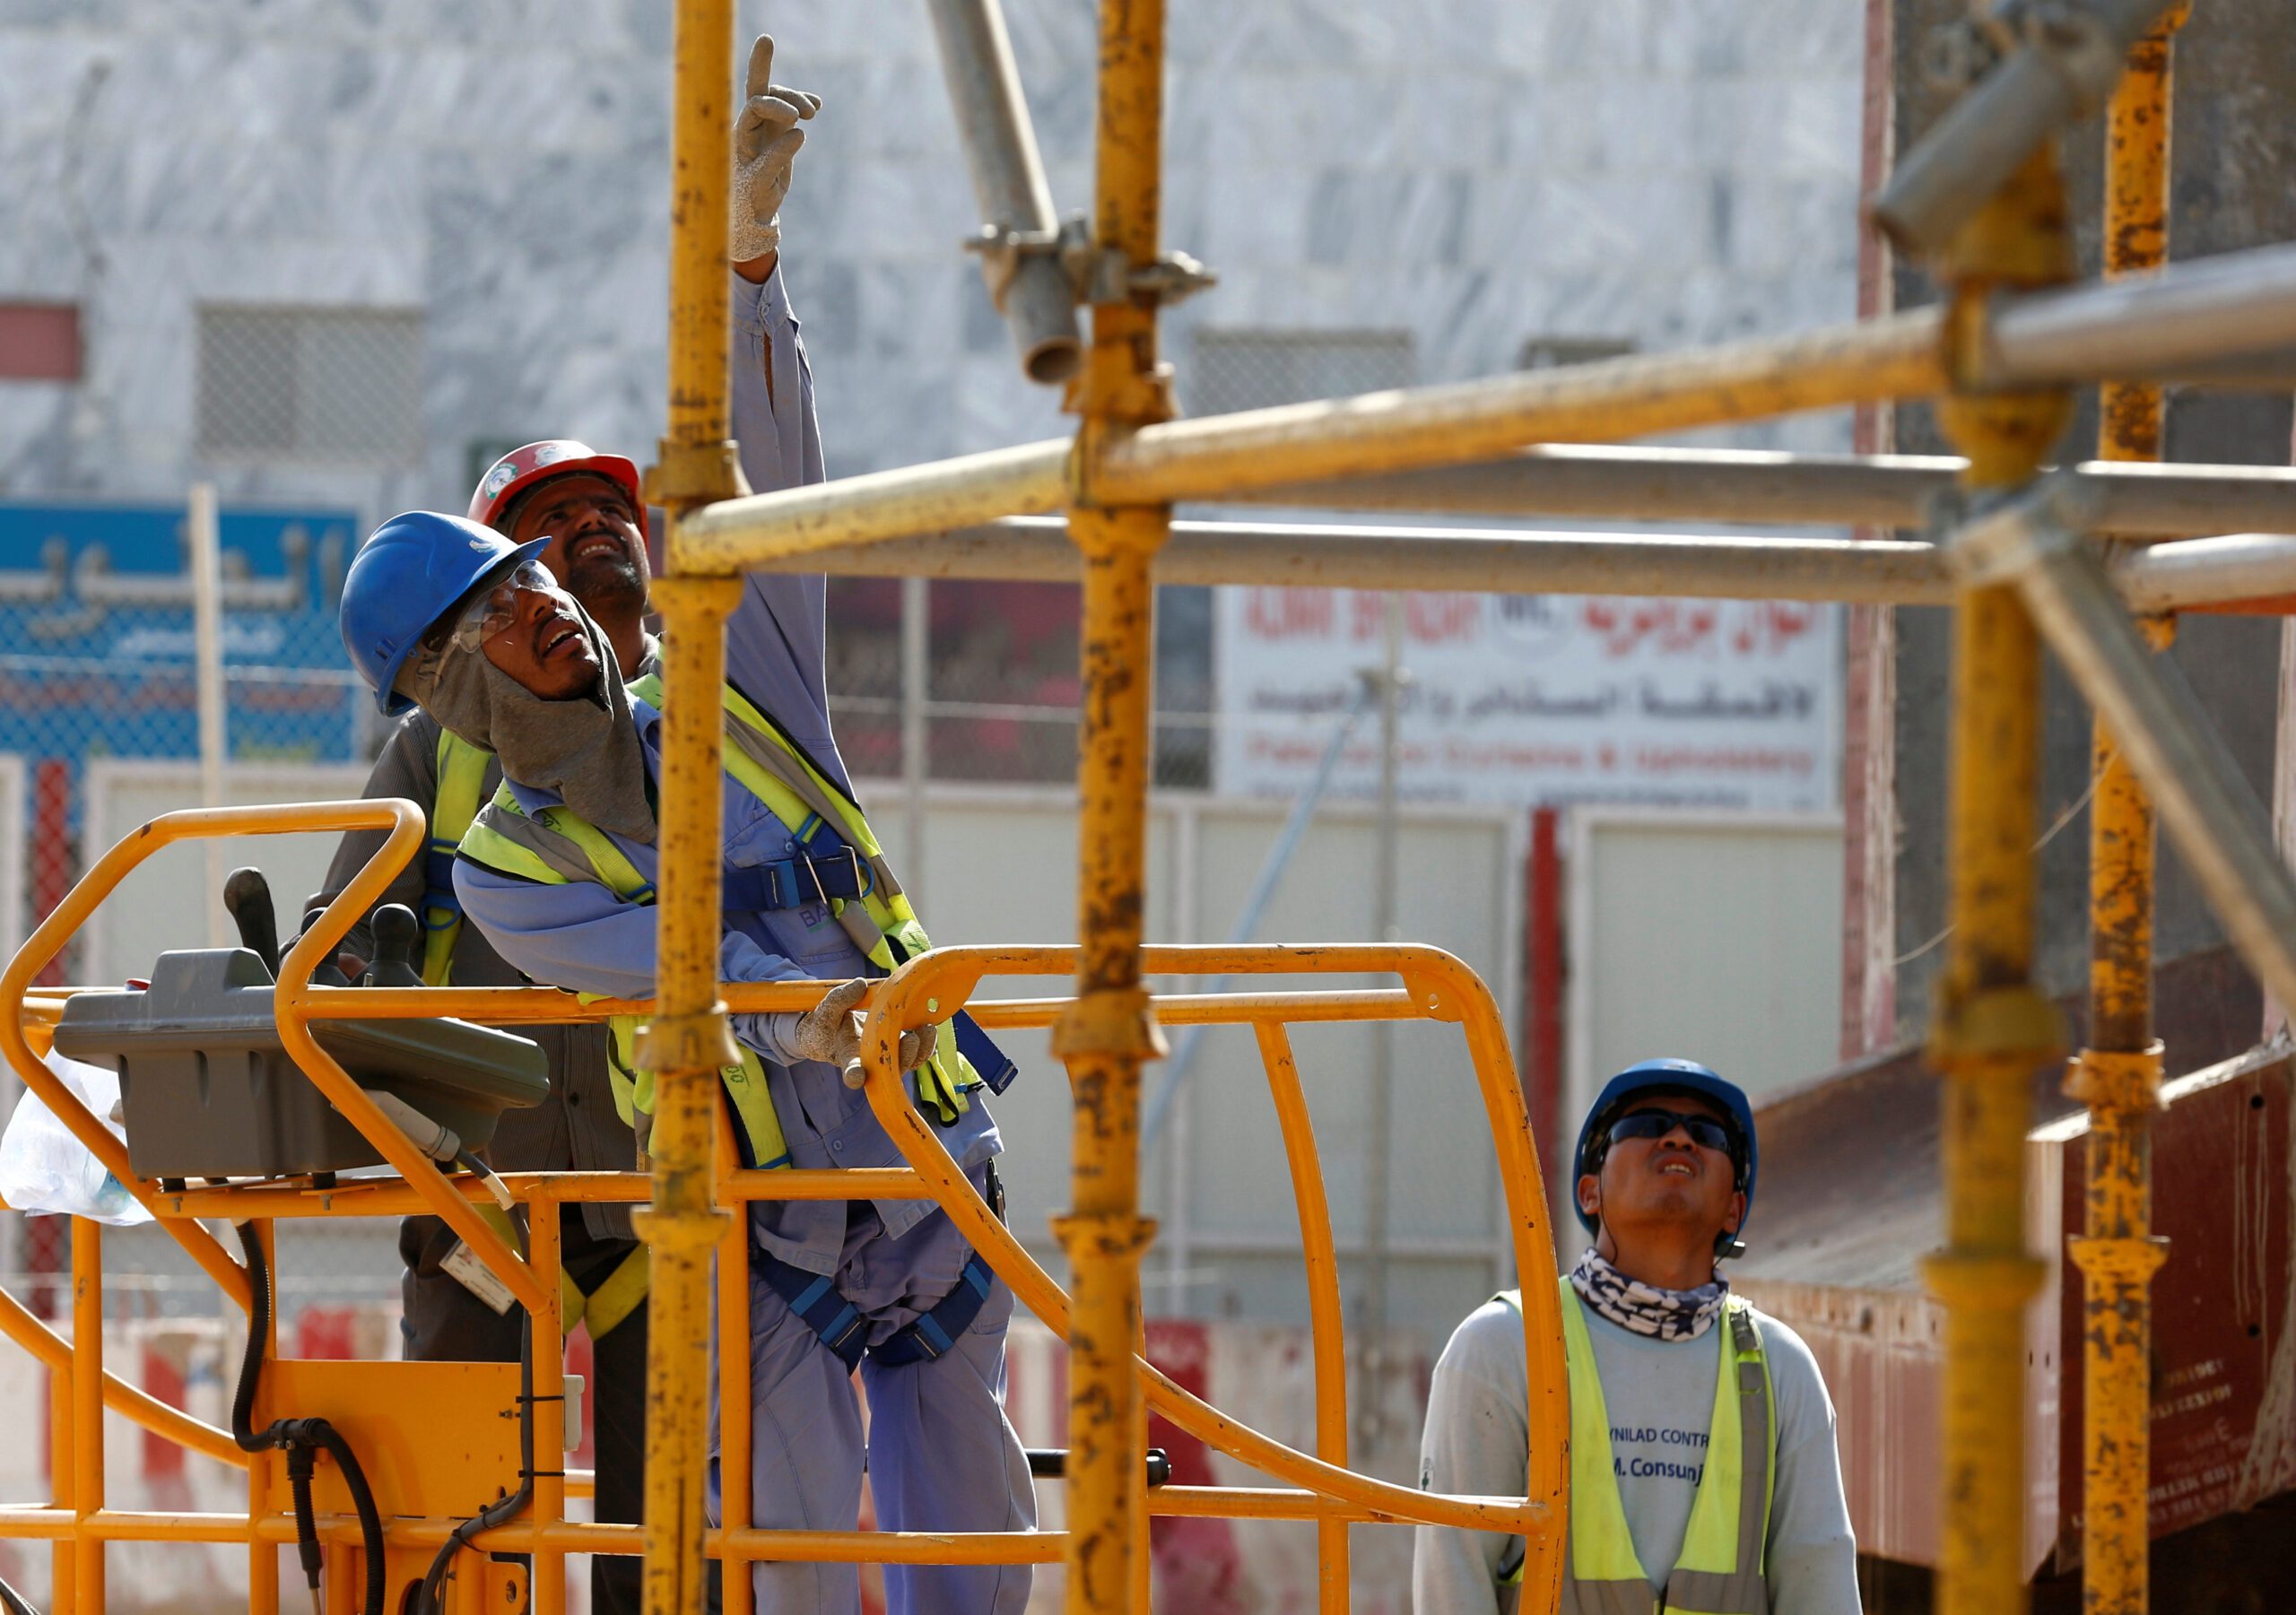 Workers at a Riyadh construction site. The Tonomus competition aims to find innovation in the sector